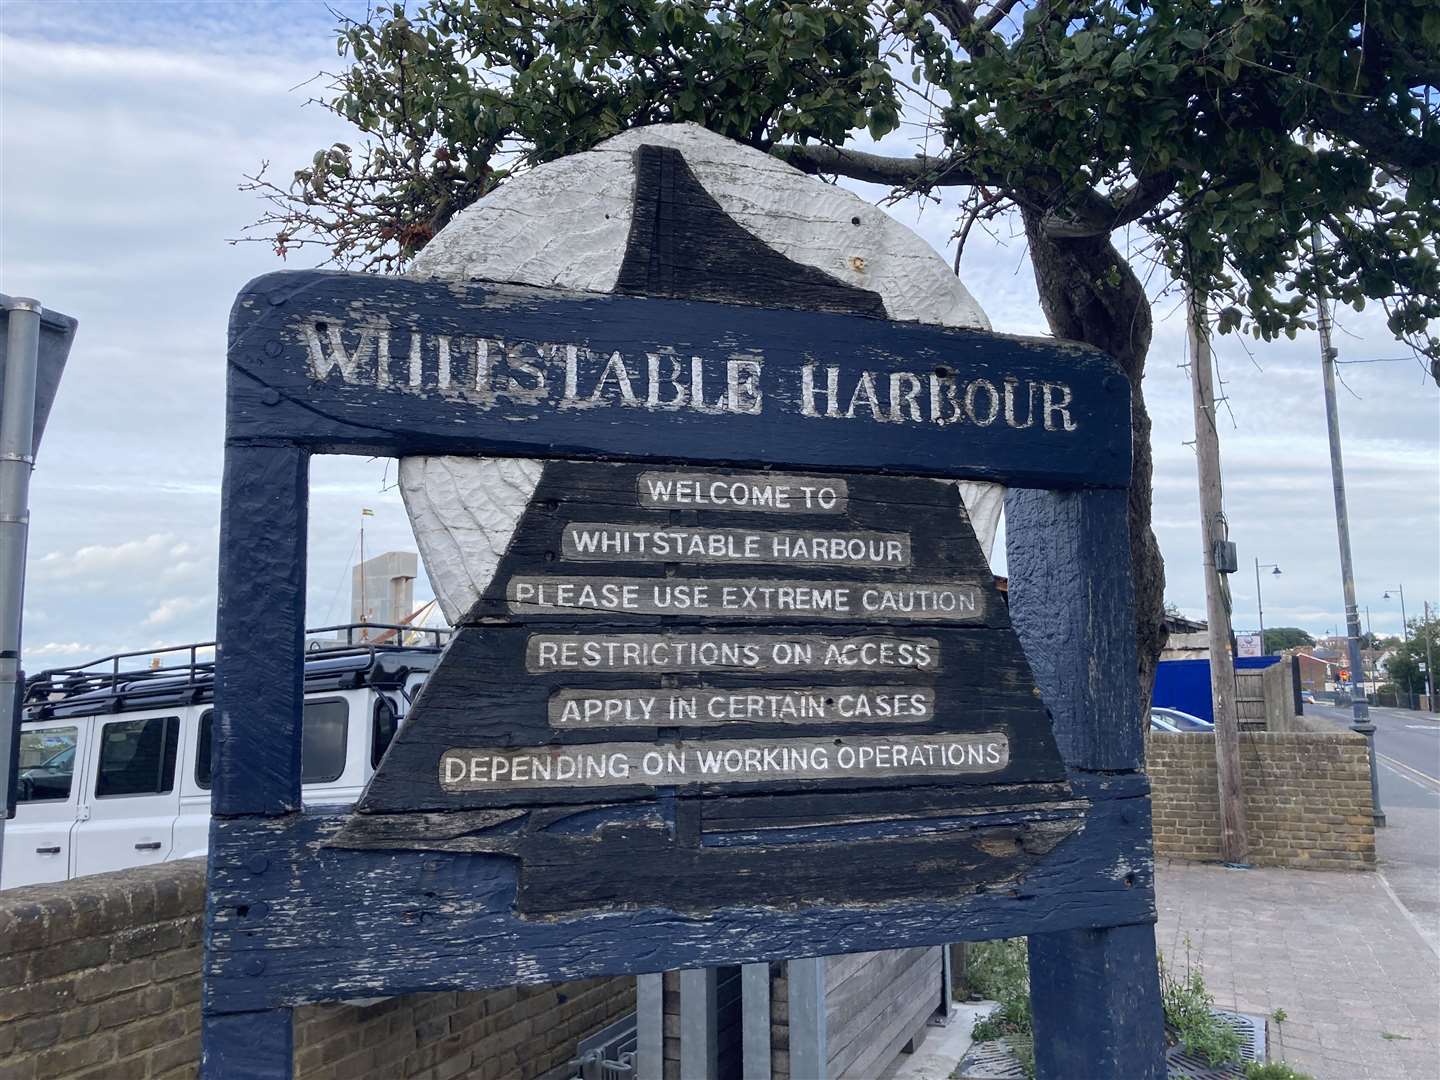 Entrance to Whitstable Harbour